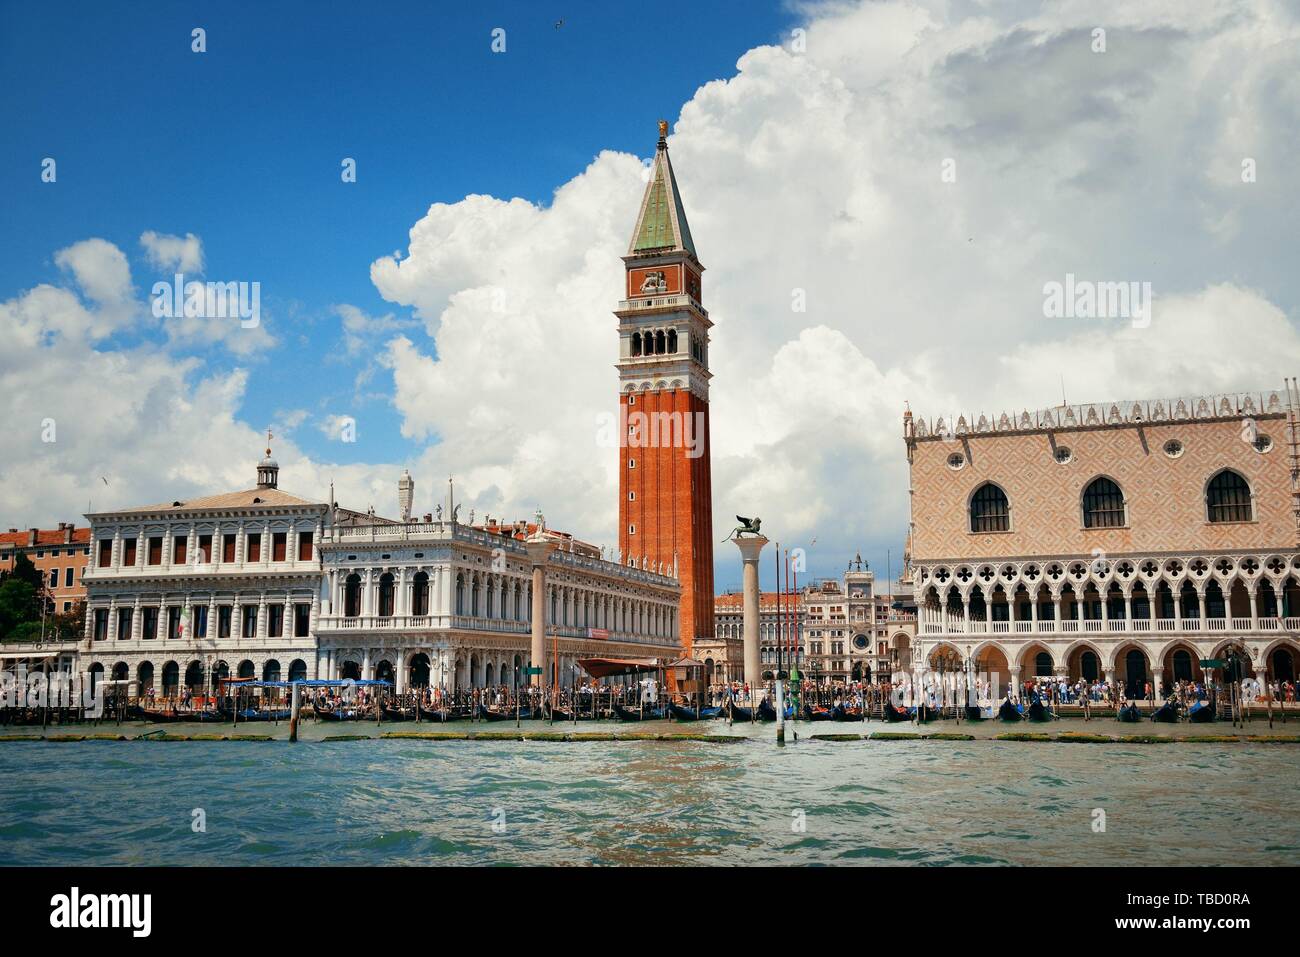 Waterfront view of Bell Tower and historical buildings at Piazza San Marco in Venice, Italy. Stock Photo